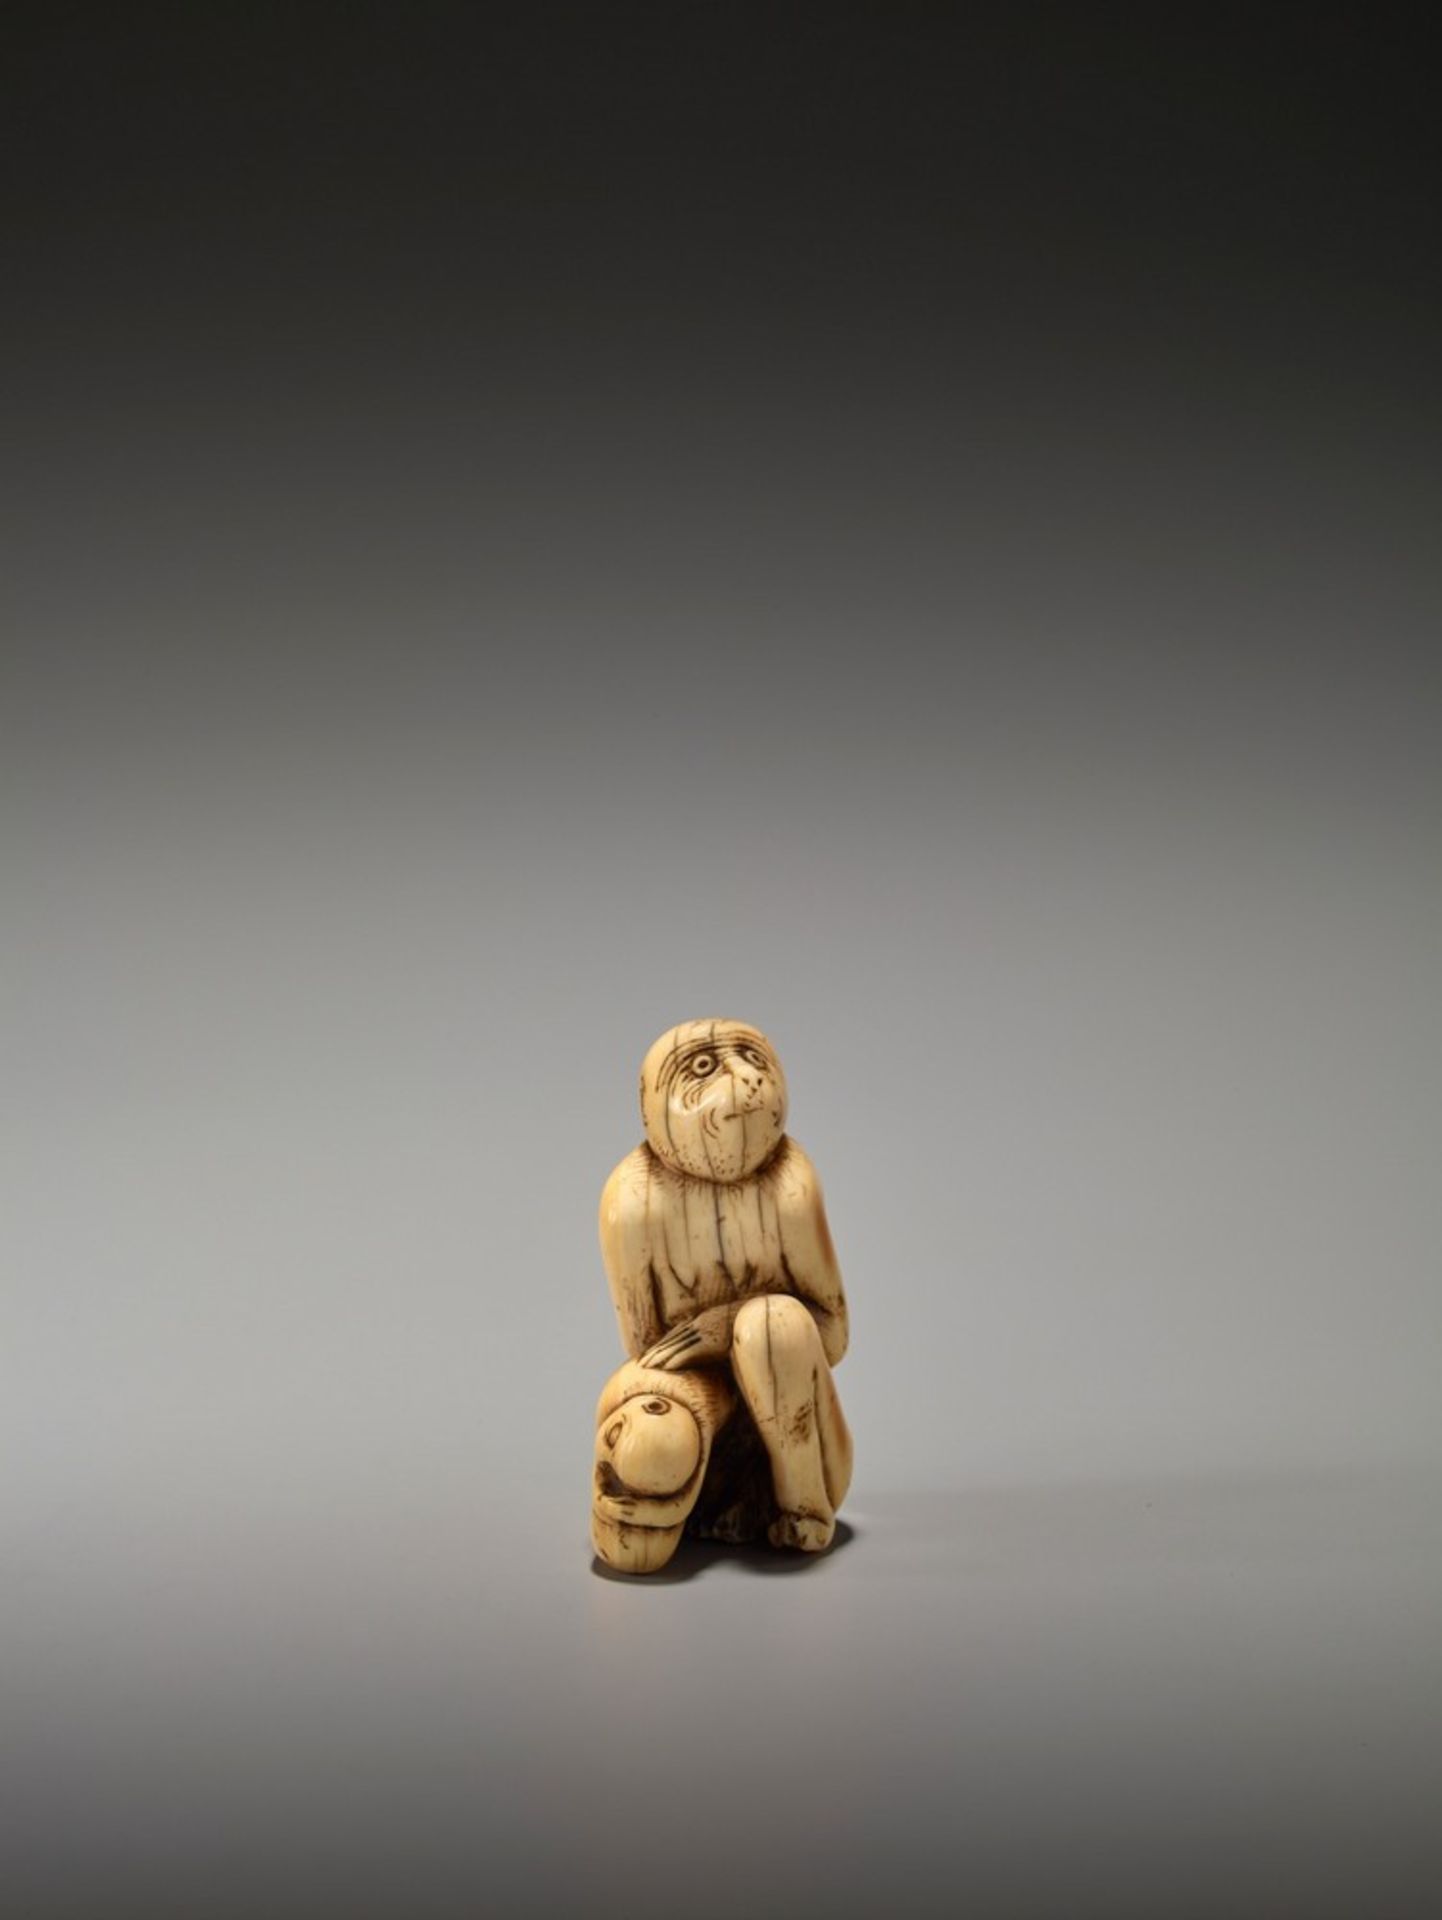 A RARE AND EARLY IVORY NETSUKE OF A MONKEY WITH YOUNG UnsignedJapan, 18th century, Edo period (